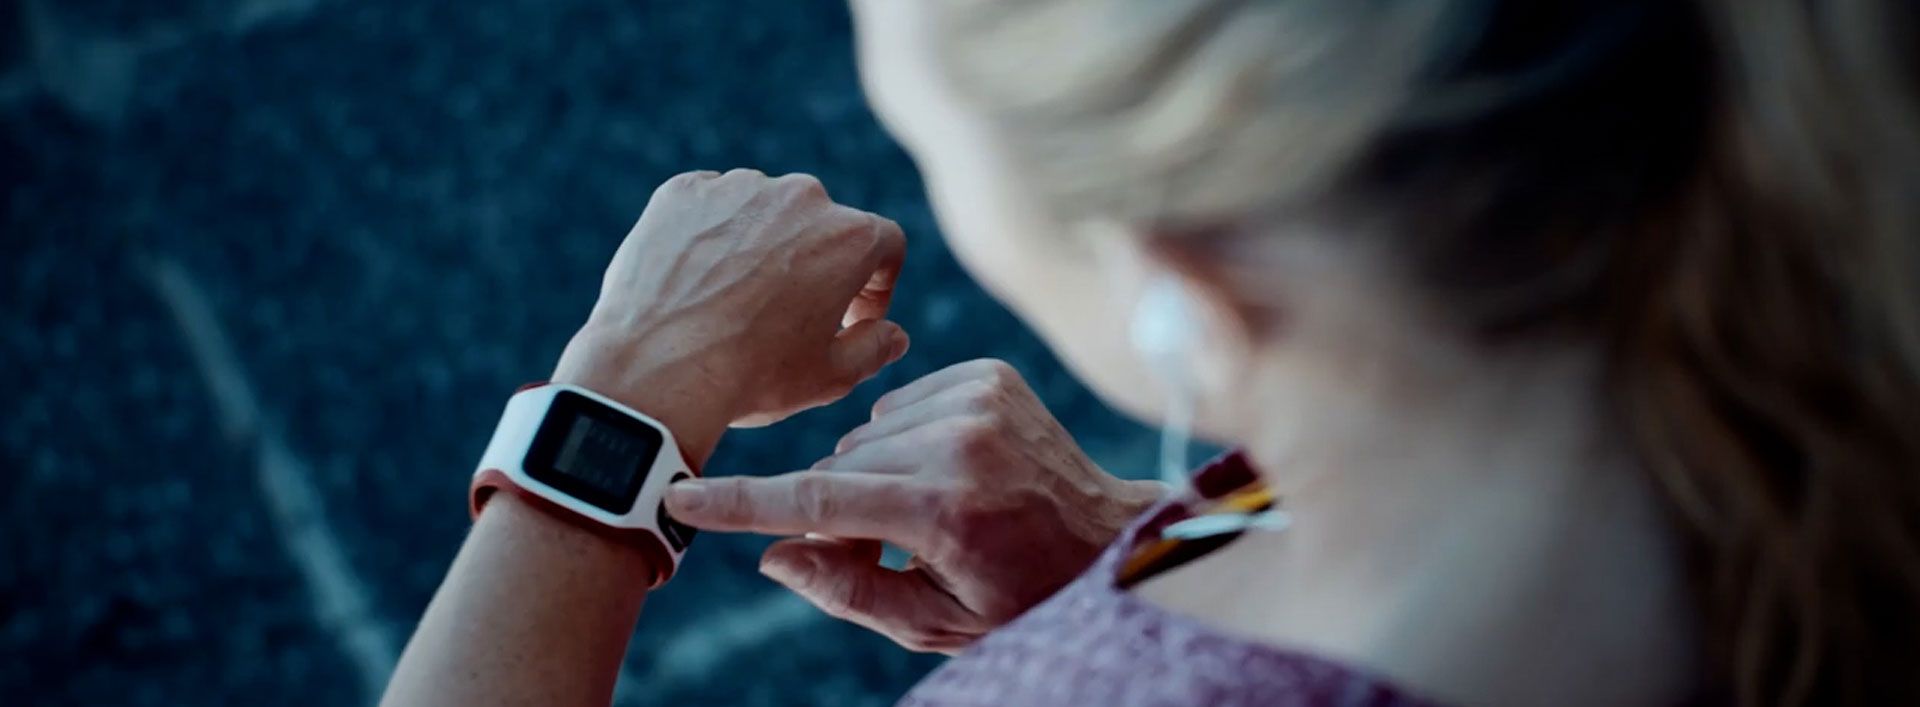 Runner looking at fitness tracker on wrist